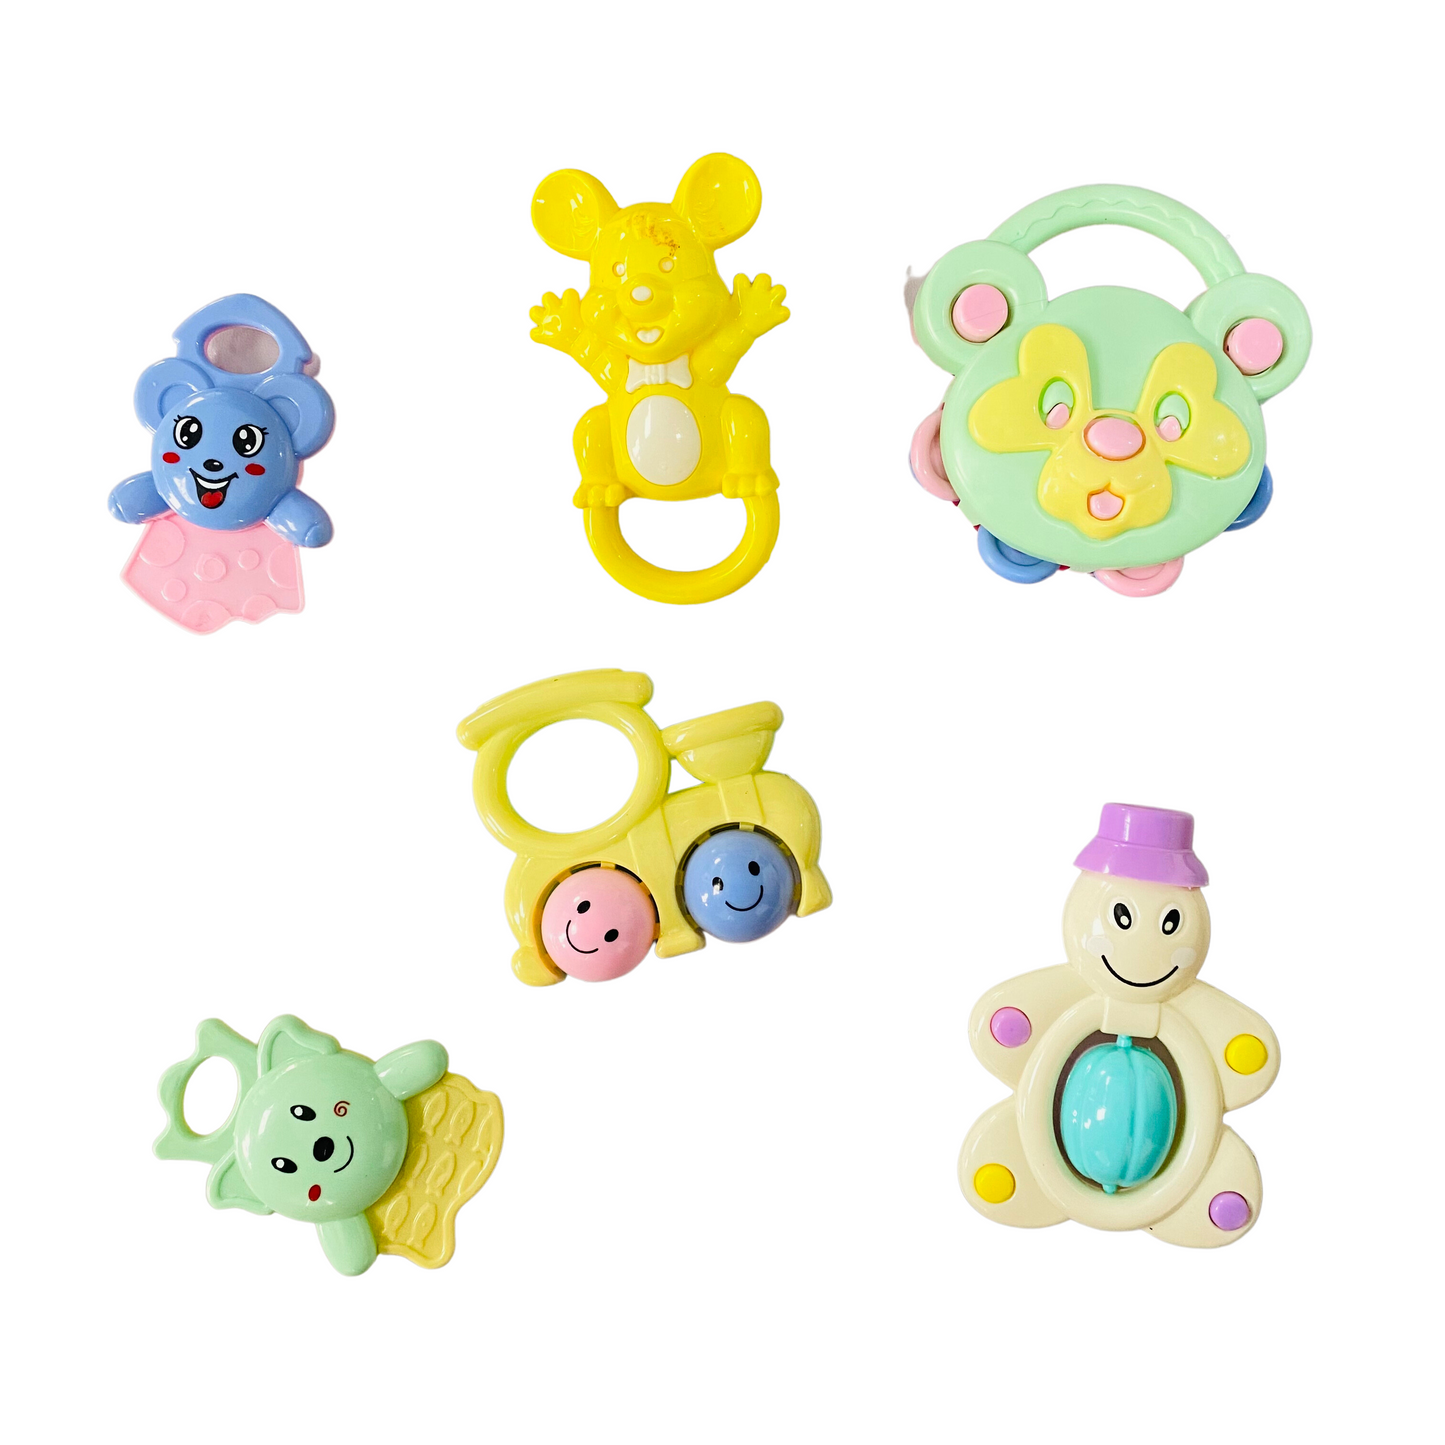 6 Set of Teething Musical Rattle Toys for Babies